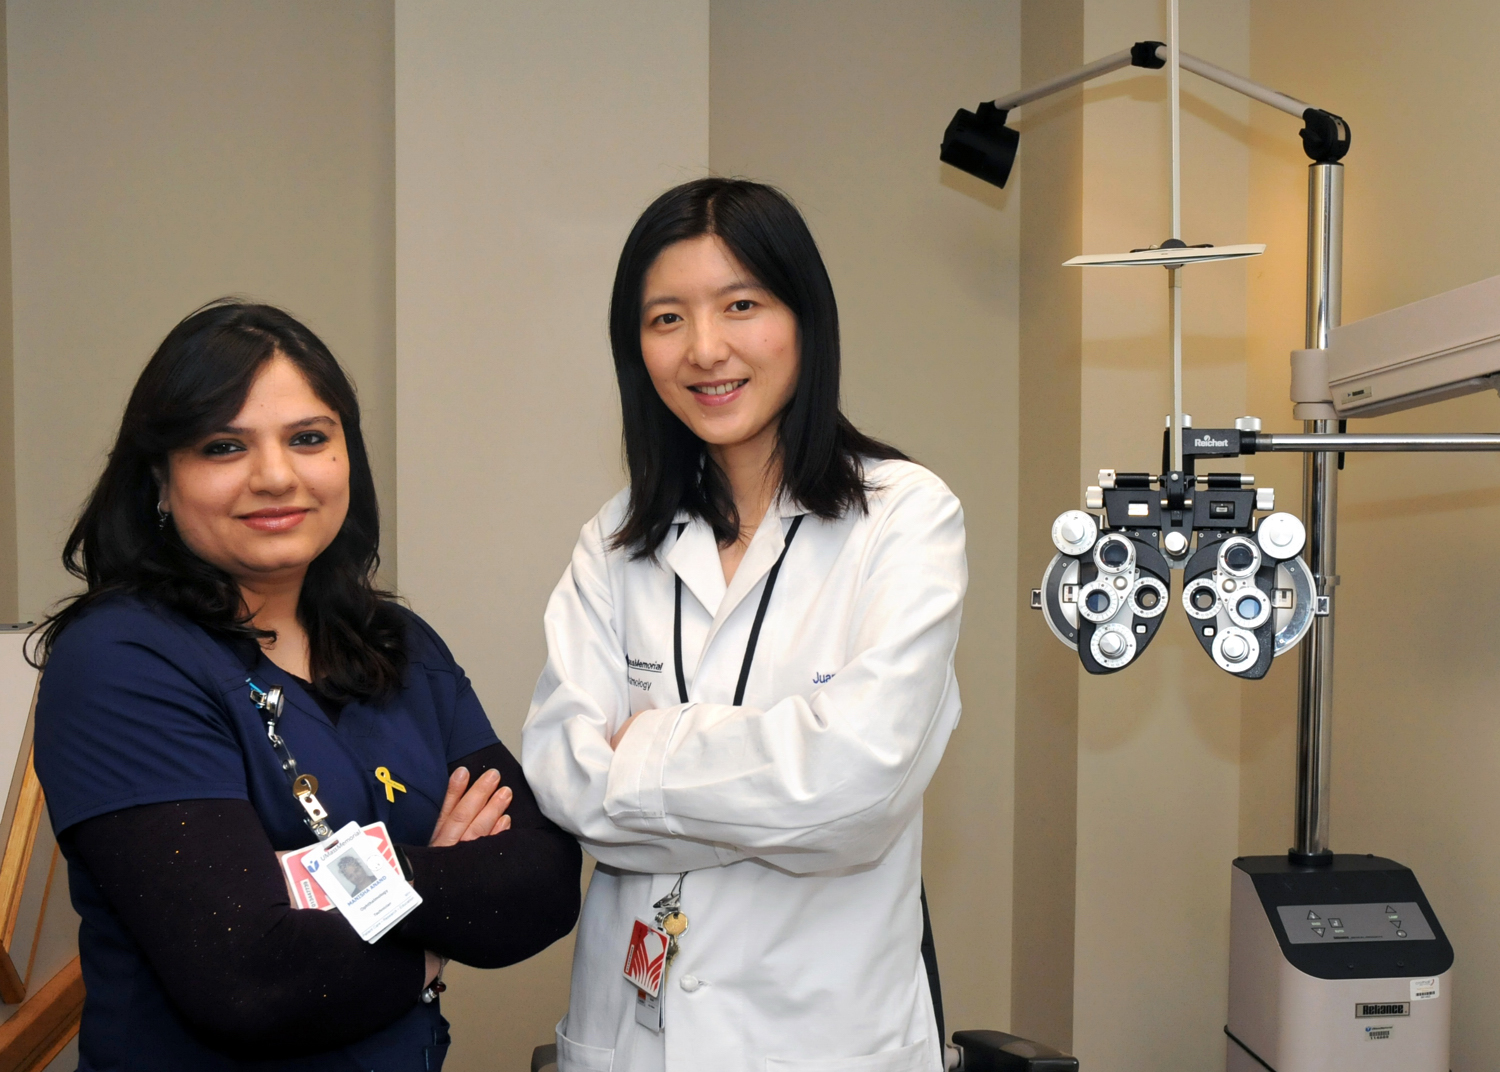 Dr. Ding and Manisha 